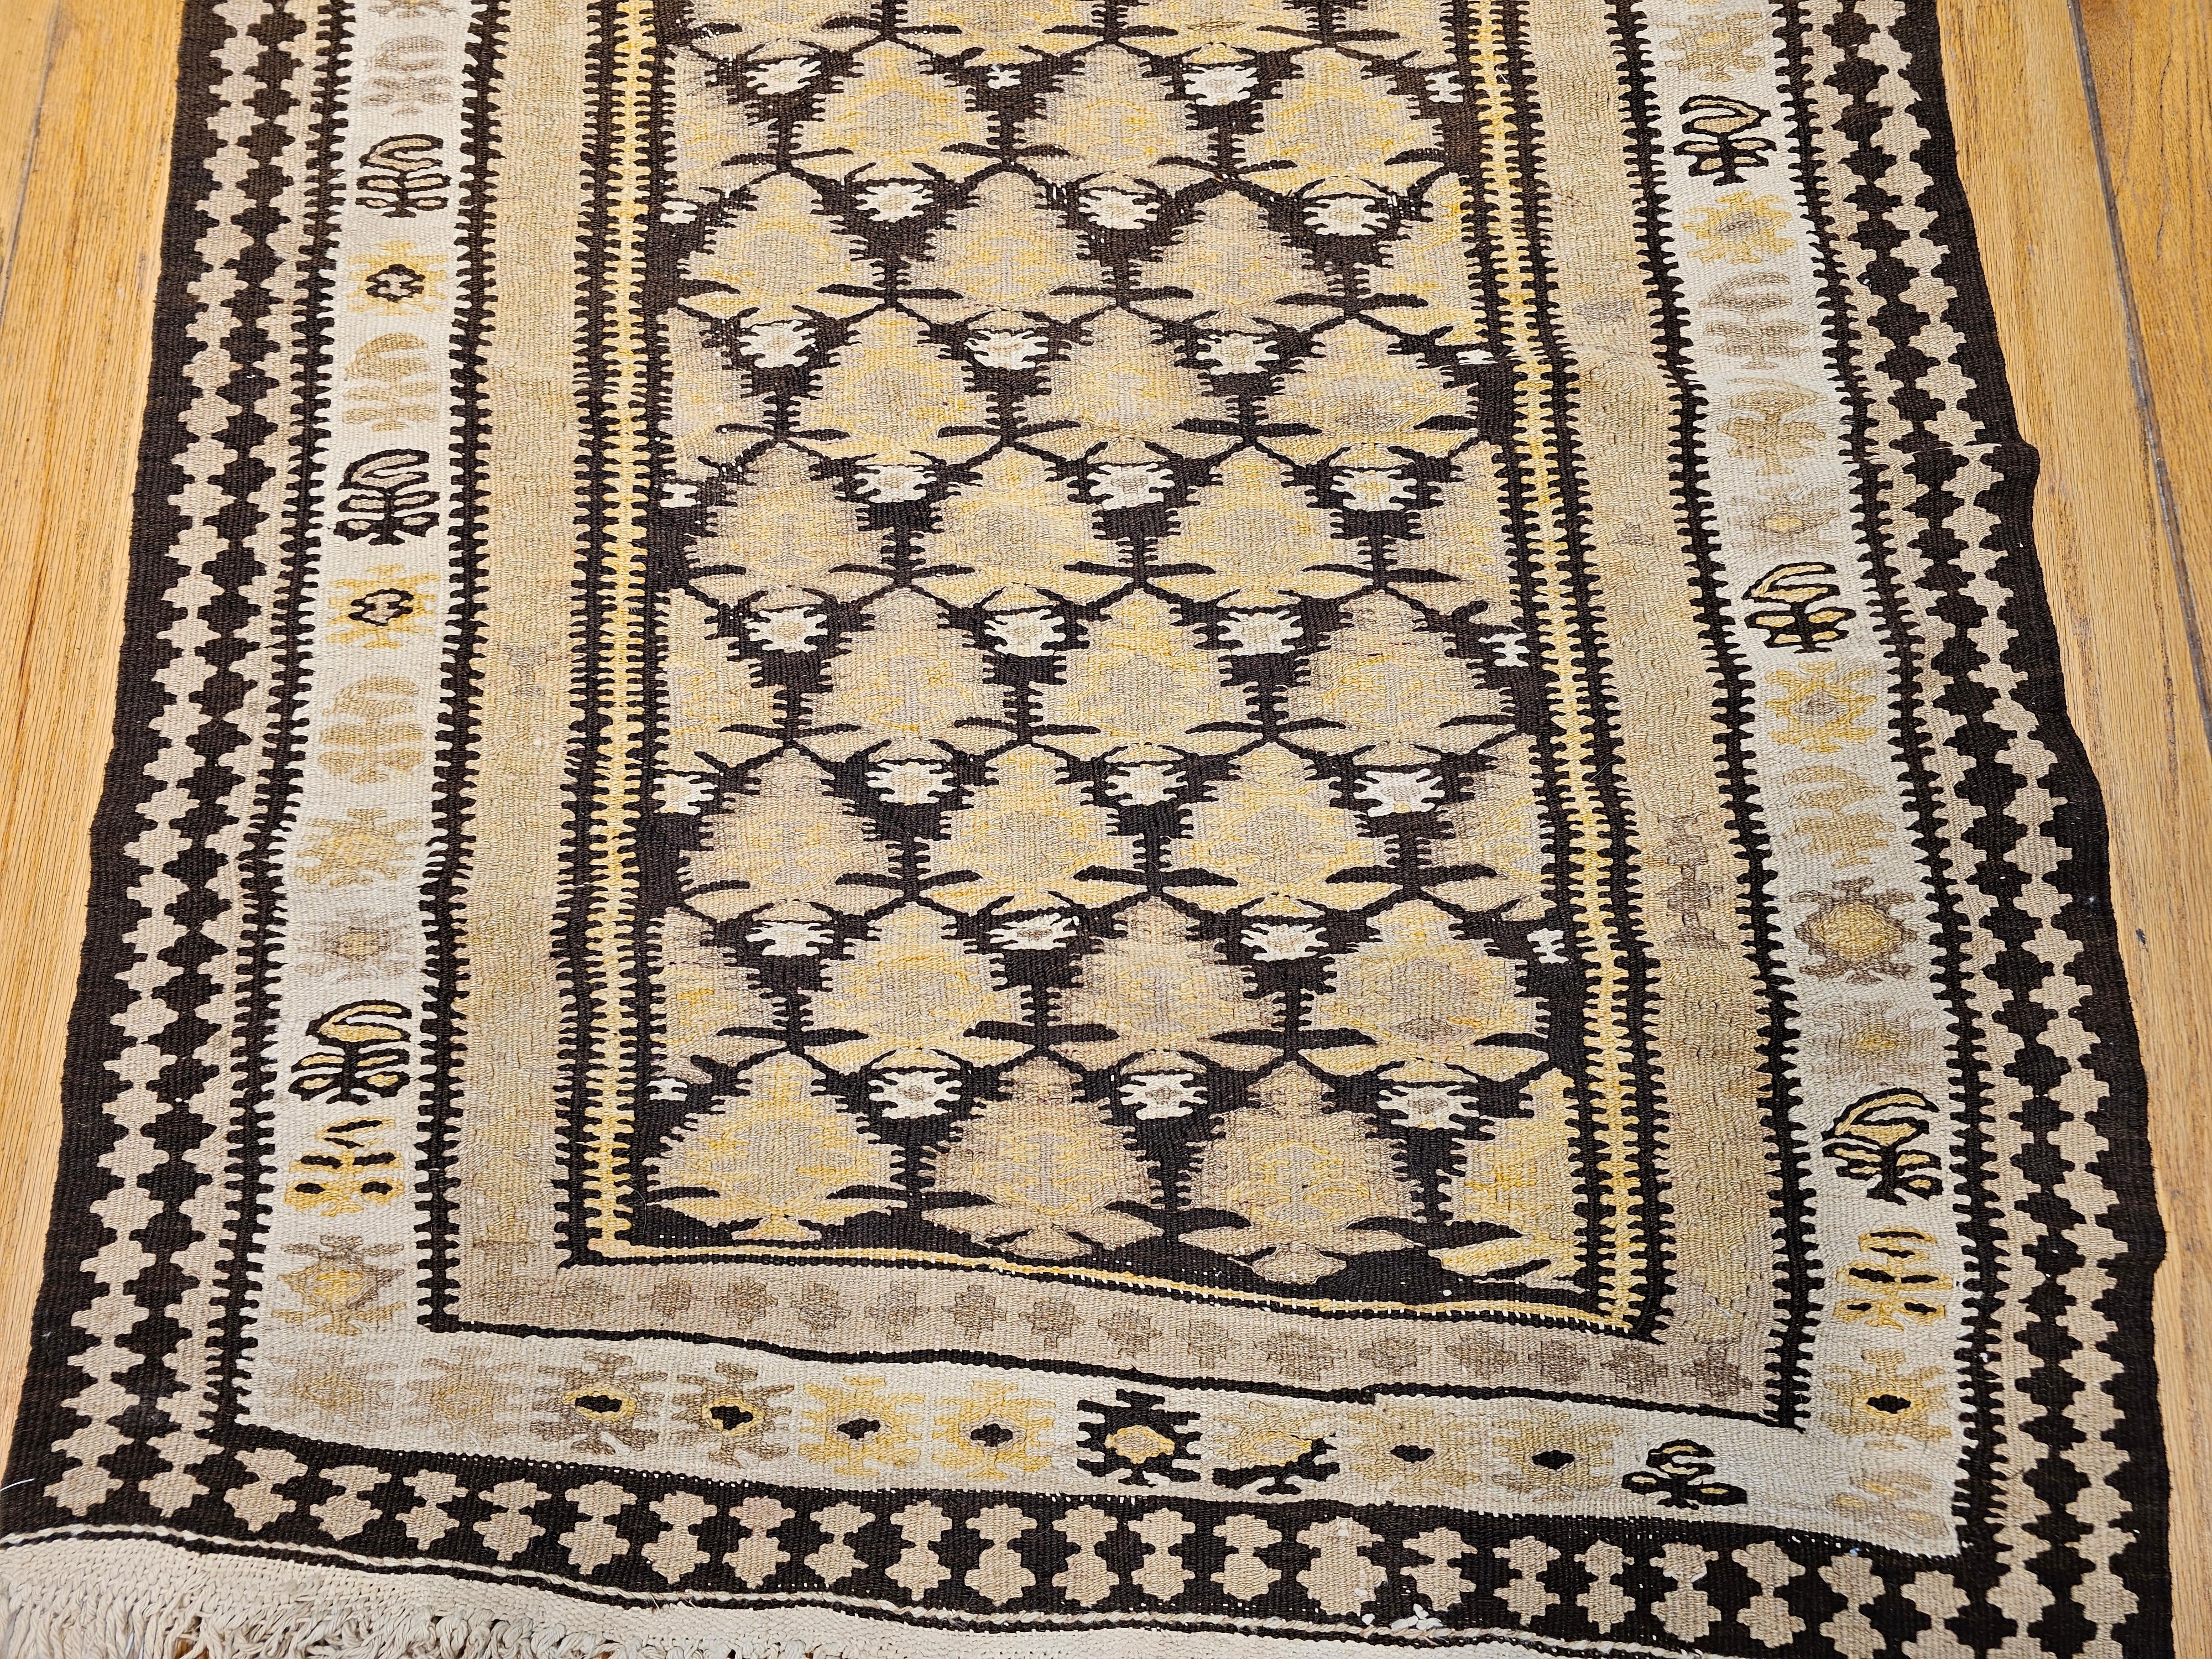 Vintage Persian Qazvin Kilim Runner in Pale Yellow, Brown, Ivory In Good Condition For Sale In Barrington, IL